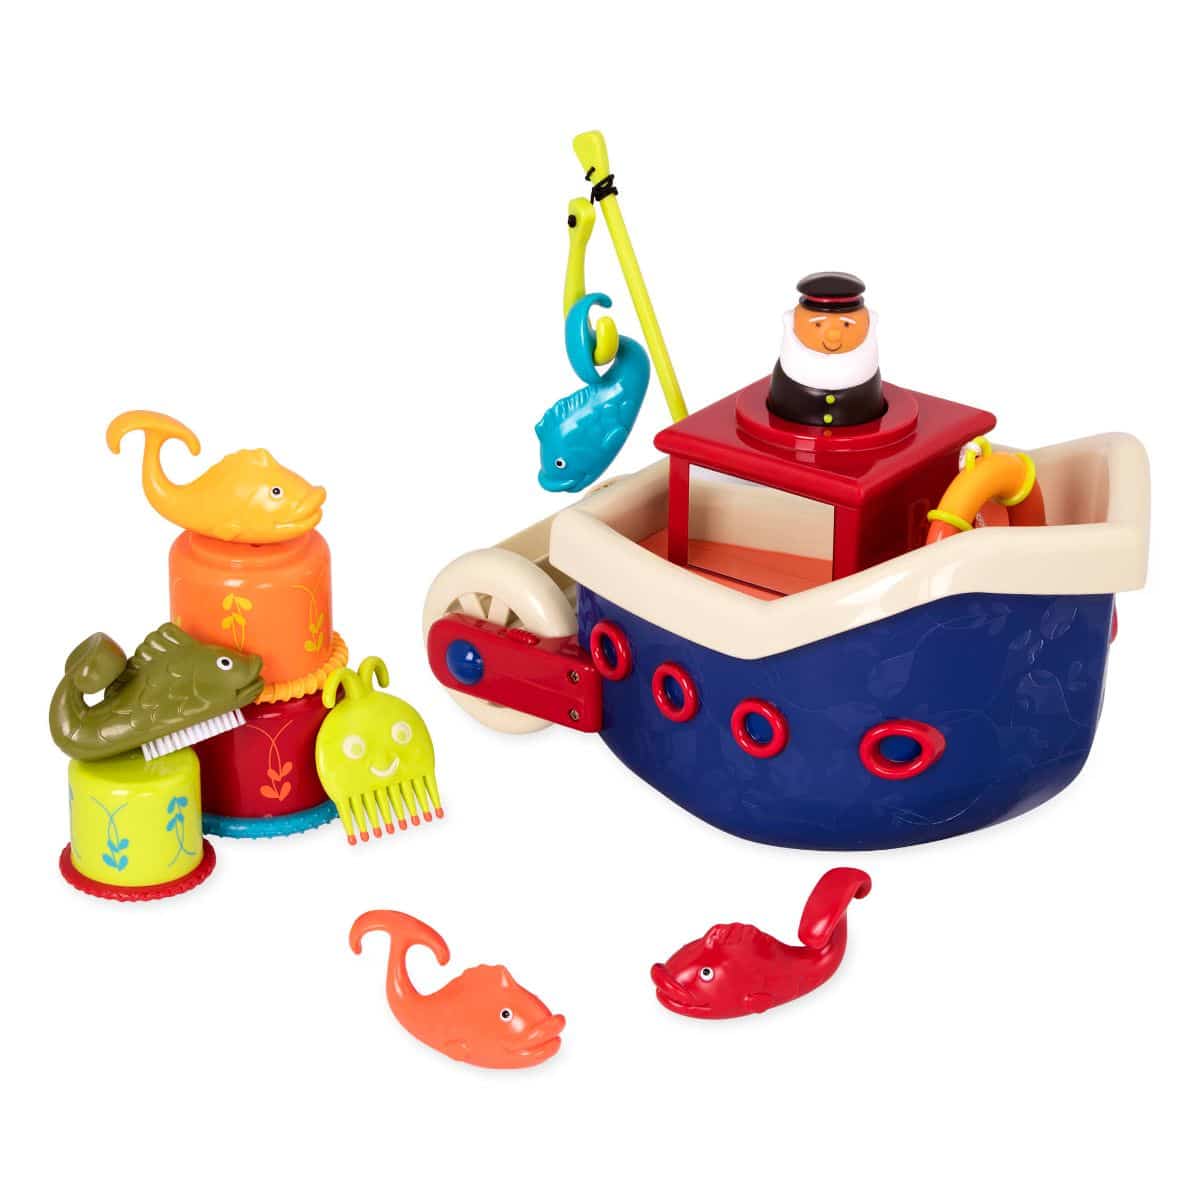 toys by Battat-Off The Hook Bath & Beach Toy Boat with Squirting Toys & Hidden Storage Compartment B 